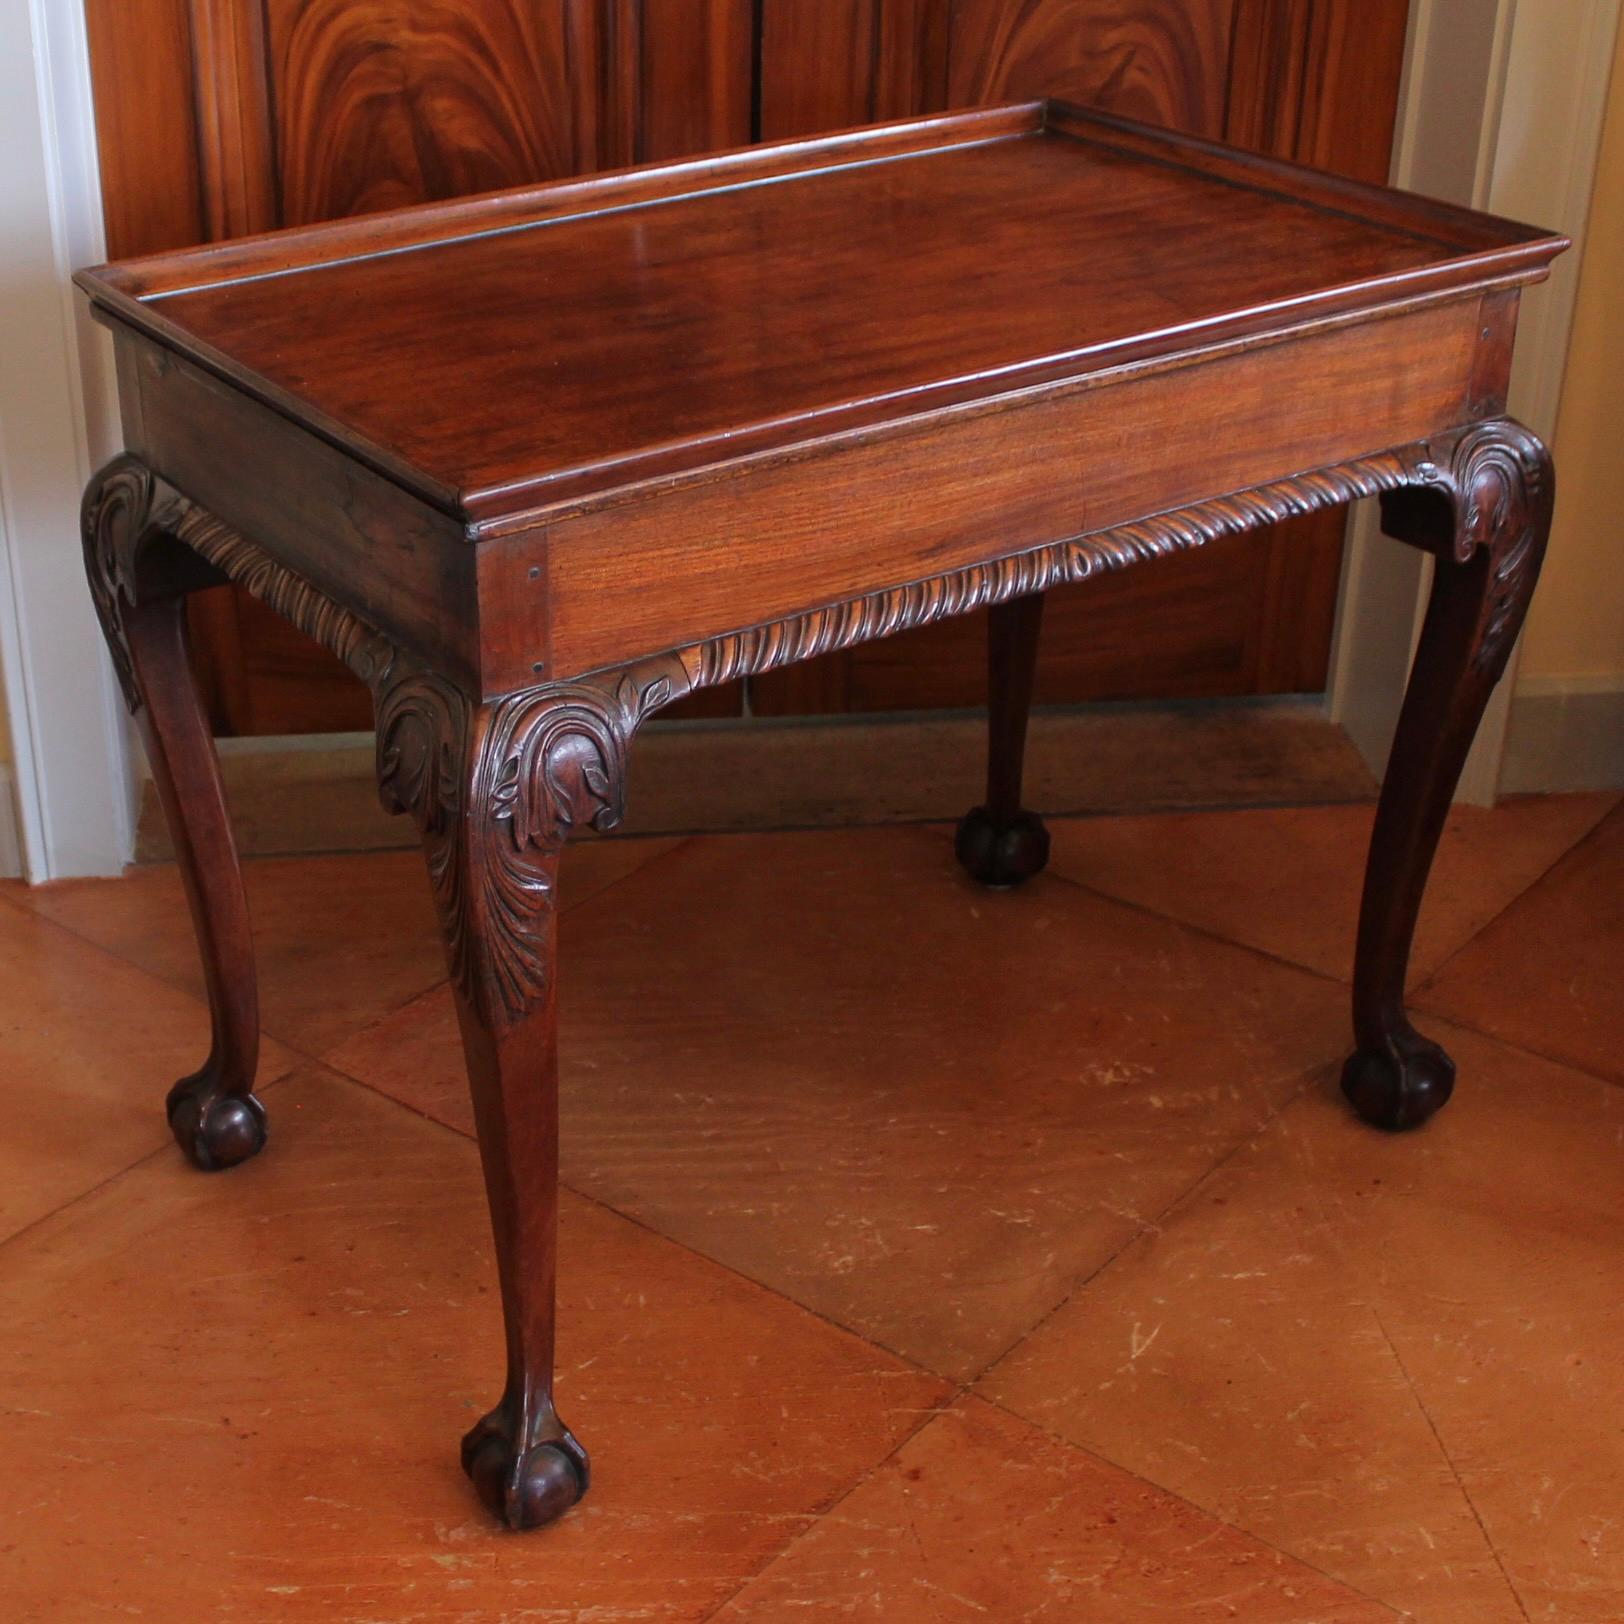 A rare and desirable form, with its tray top and the carving finished in order to be seen from all sides, the cabriole legs terminate in very well carved ball and claw feet. The knees are carved with acanthus, in a manner closely related to Irish